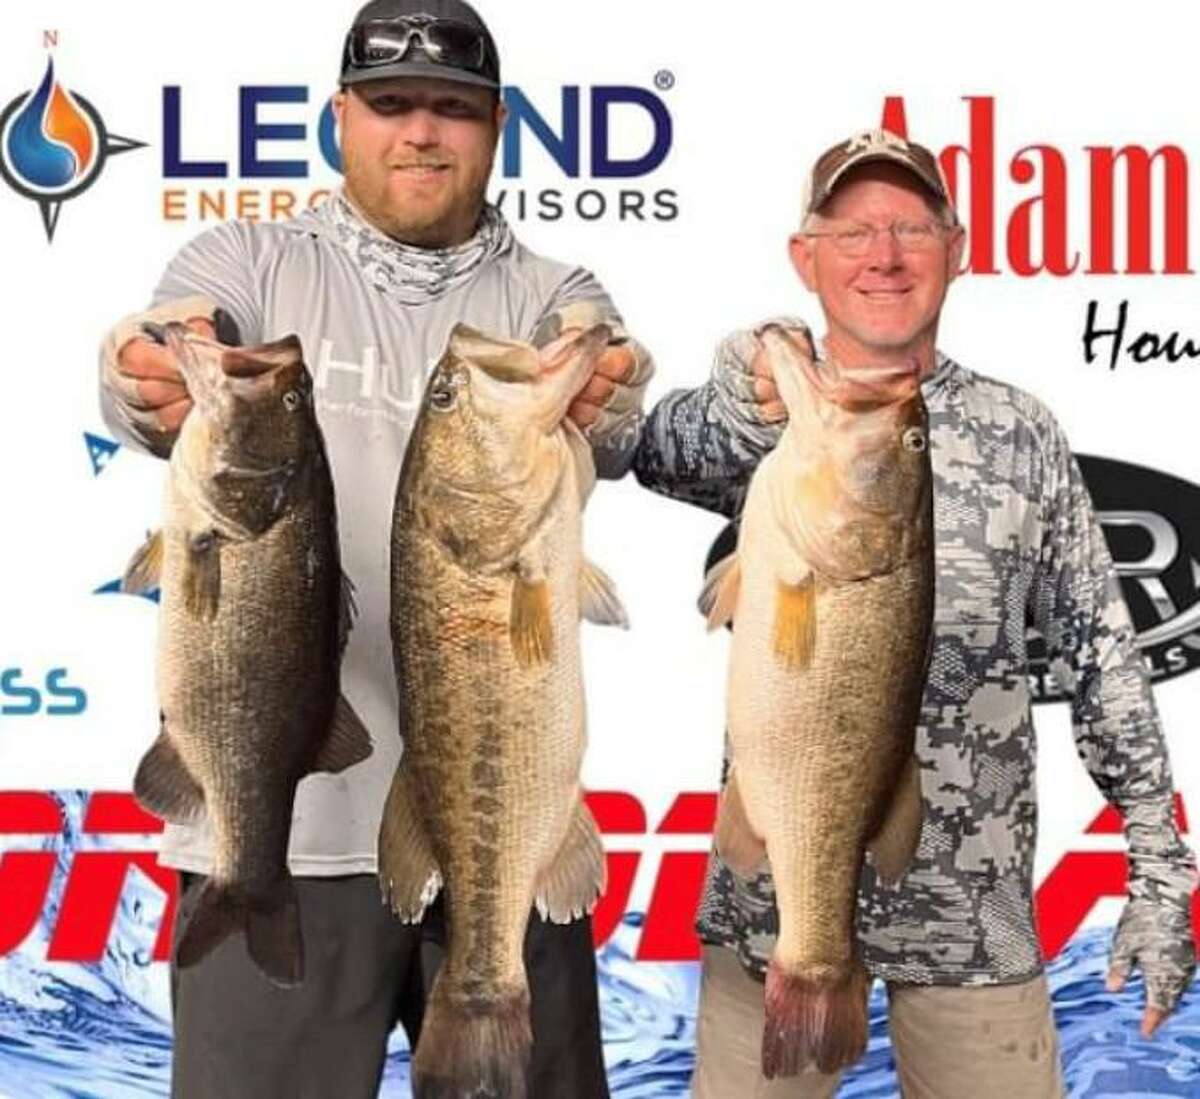 David Perciful and Bo Brown came in first place in the CONROEBASS Tuesday Tournament with a stringer weight of 17.17 pounds.